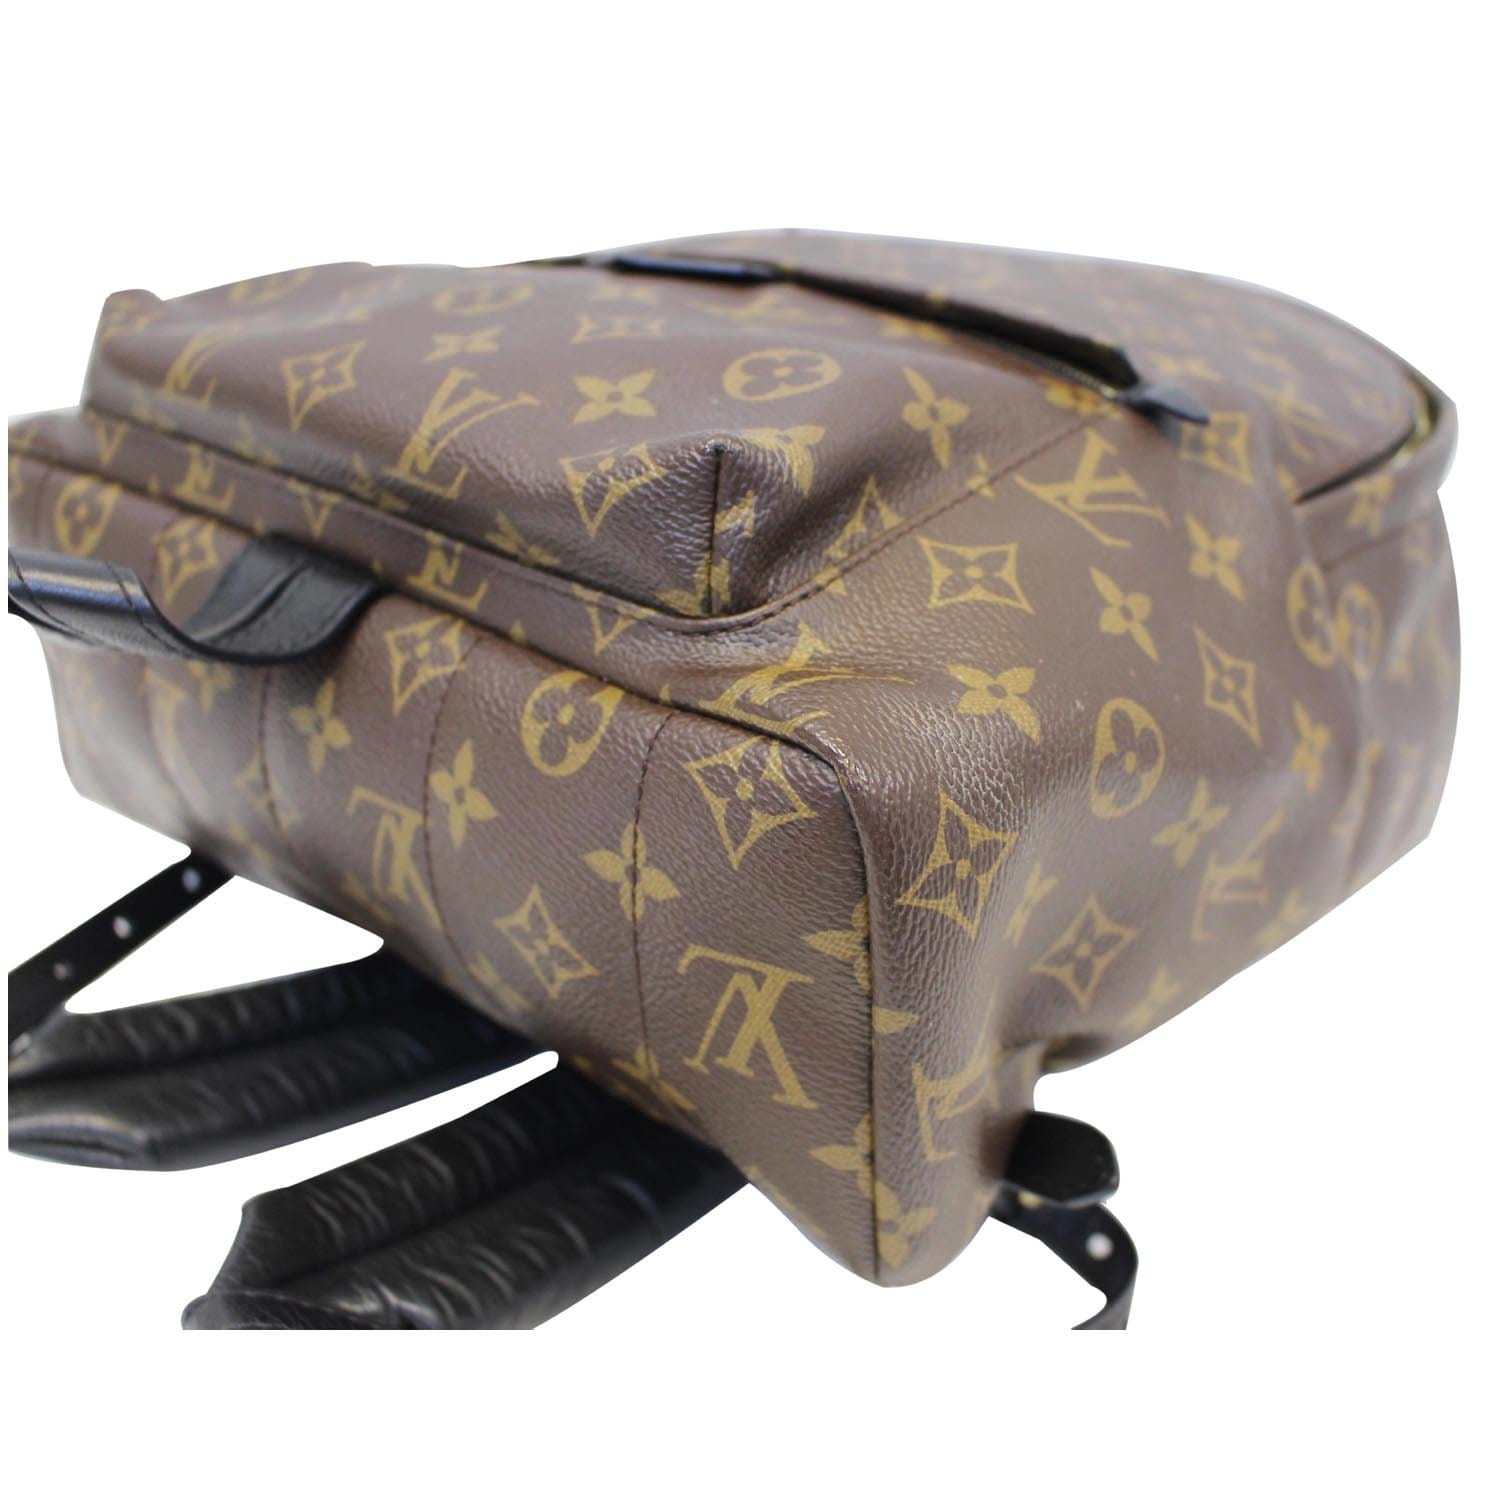 Christopher MM Monogram Other - Bags